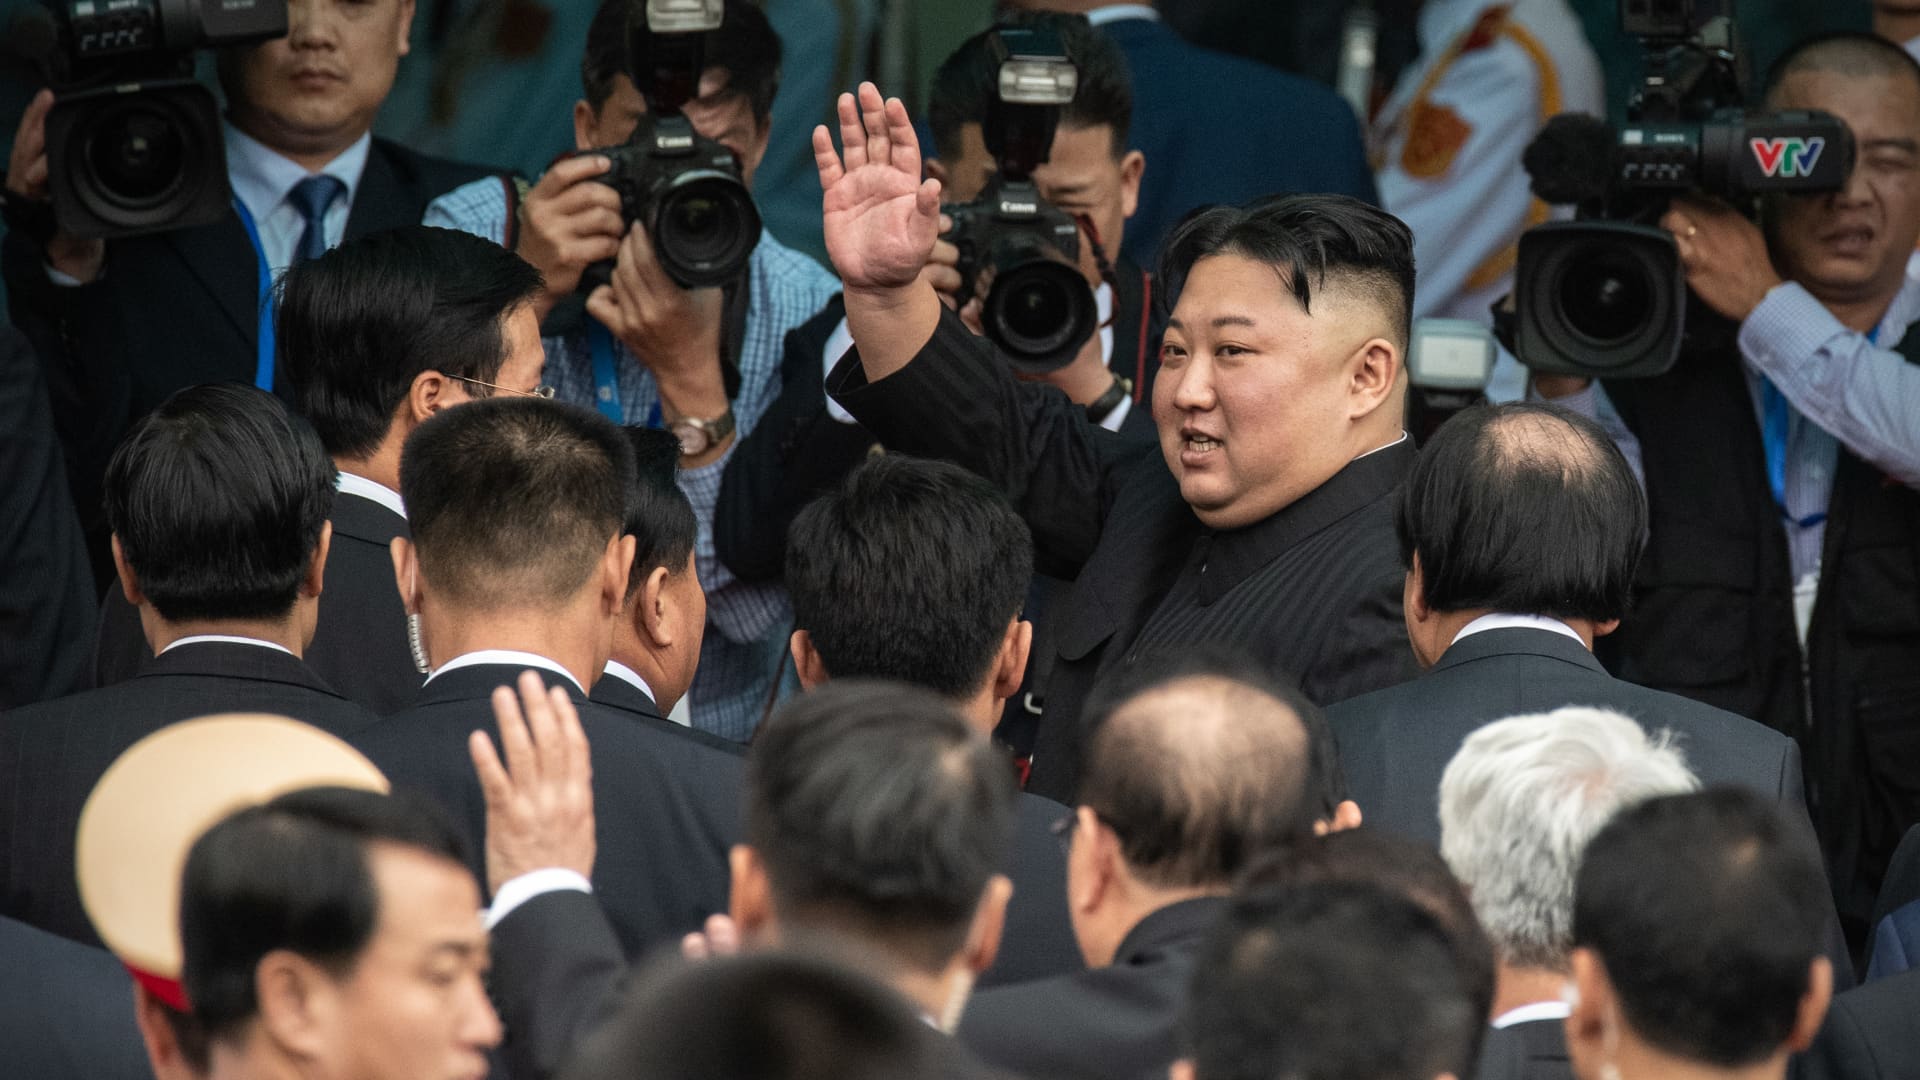 North Korean leader Kim Jong Un waves as he prepares to leave Vietnam by train after a two day official visit preceded by the DPRK-USA Hanoi summit, on March 2, 2019 in Dong Dang, Vietnam.